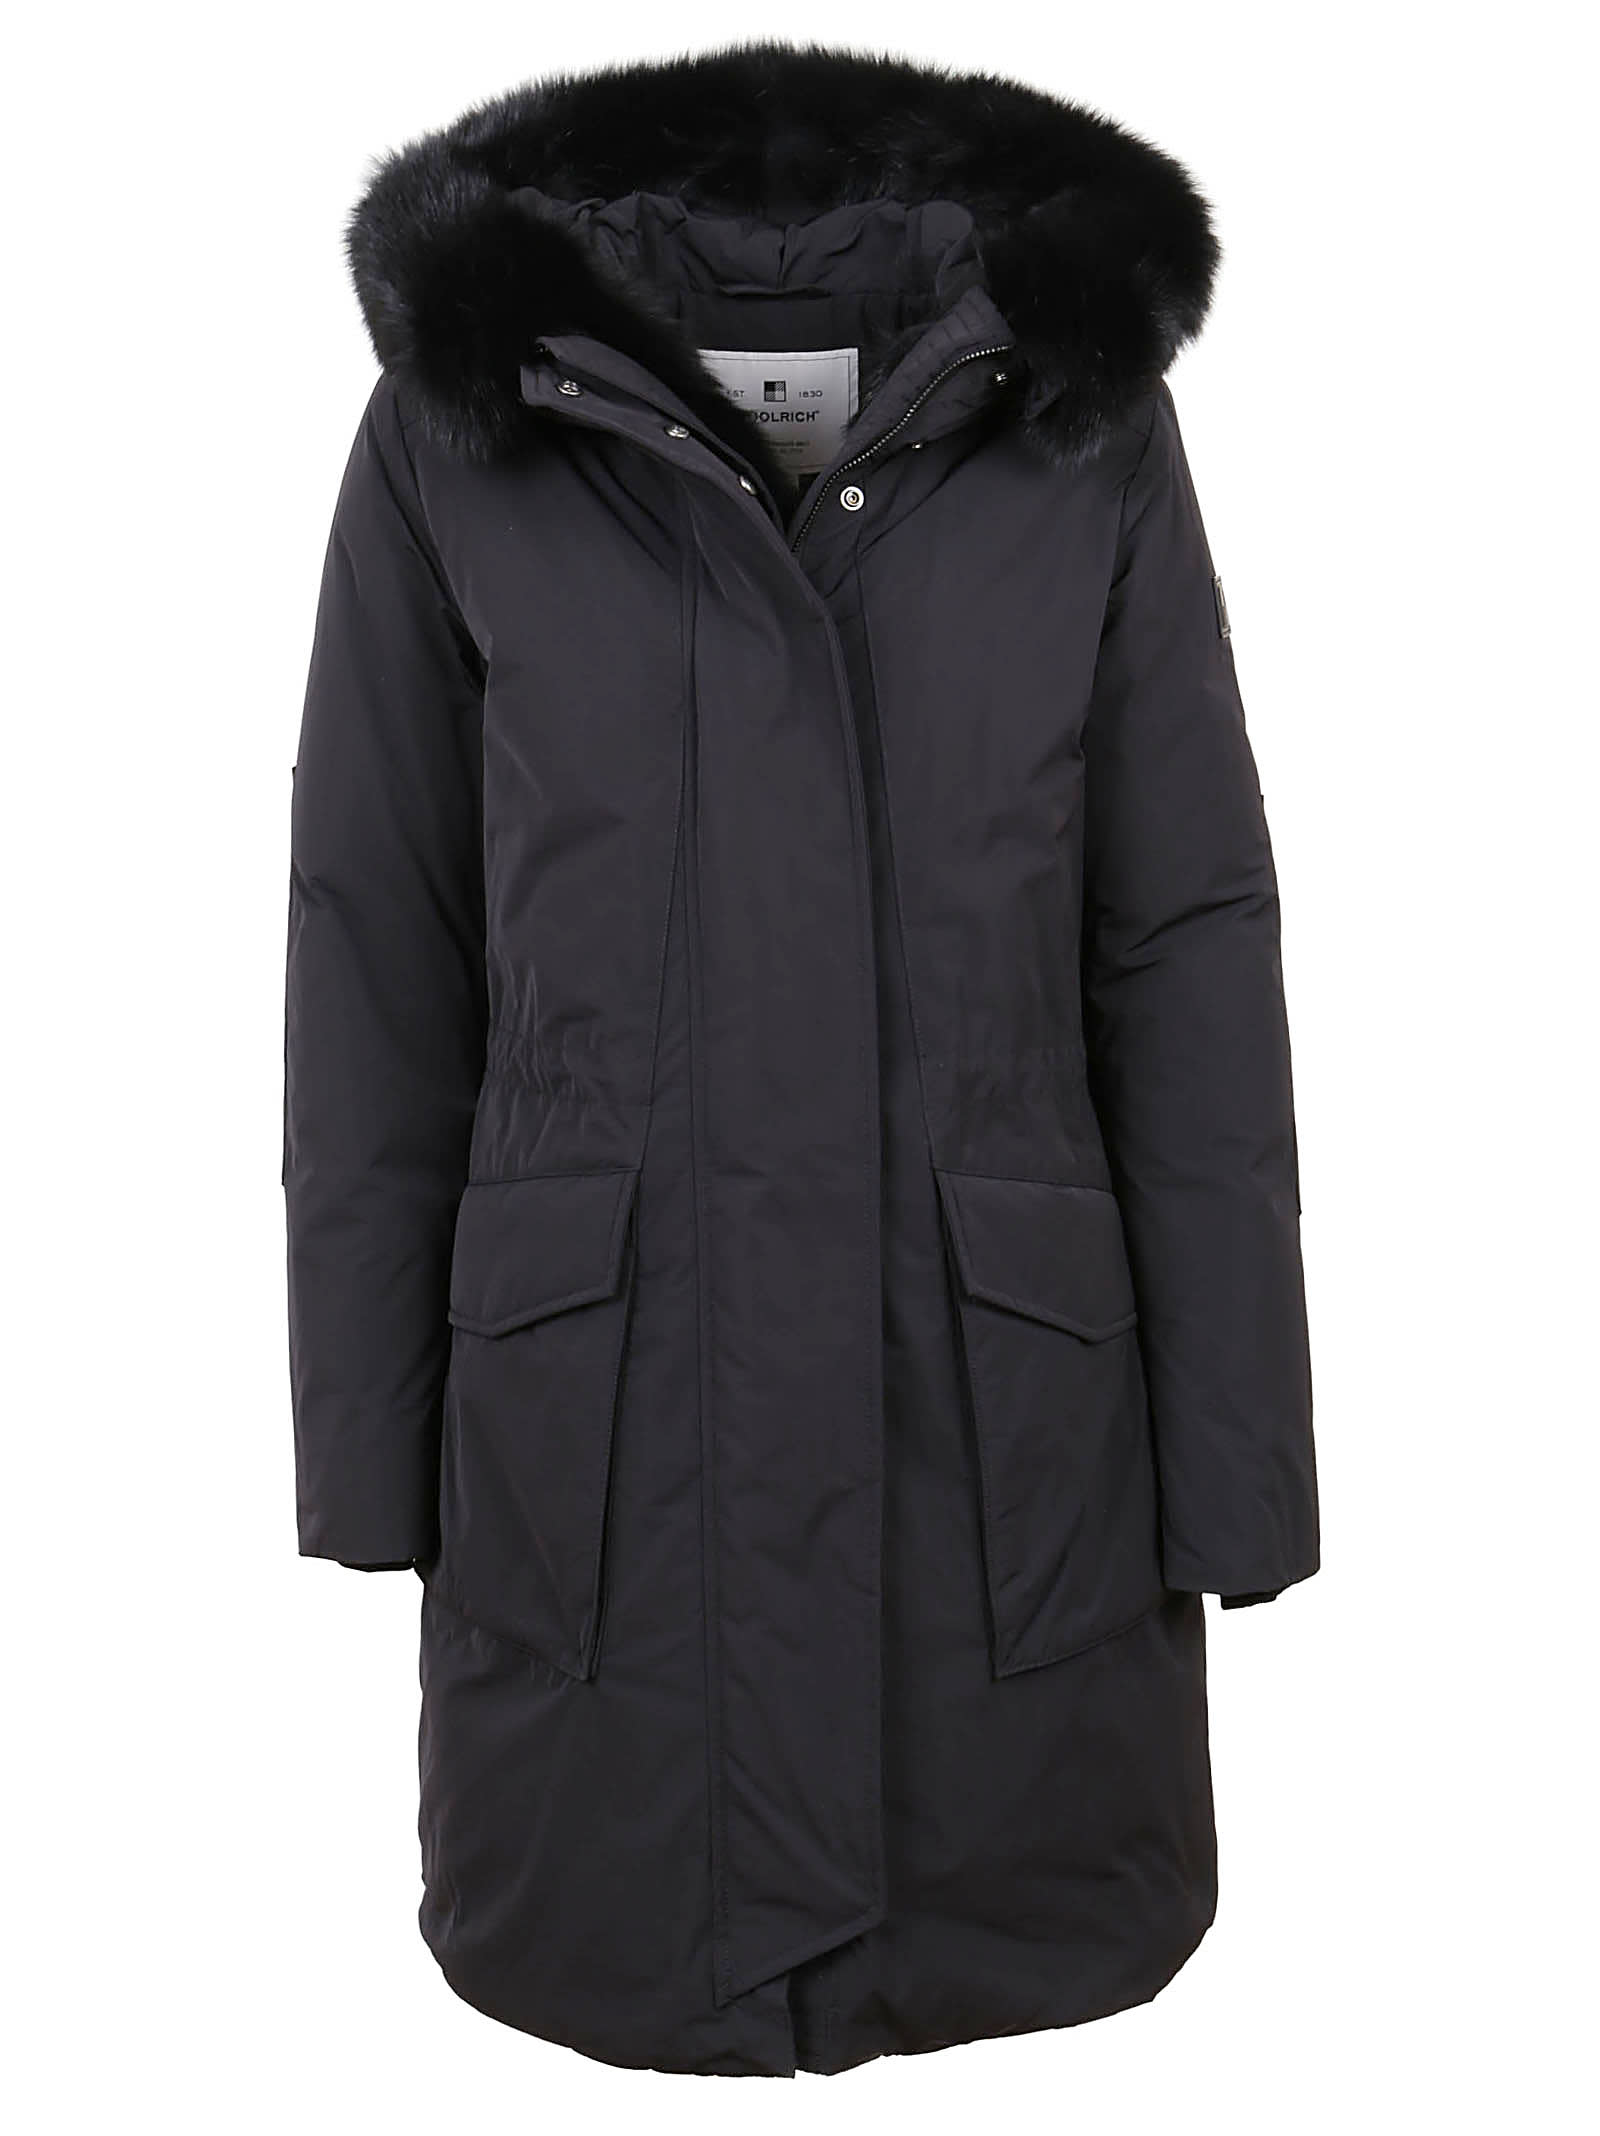 Woolrich Black Technical Fabric Padded Jacket